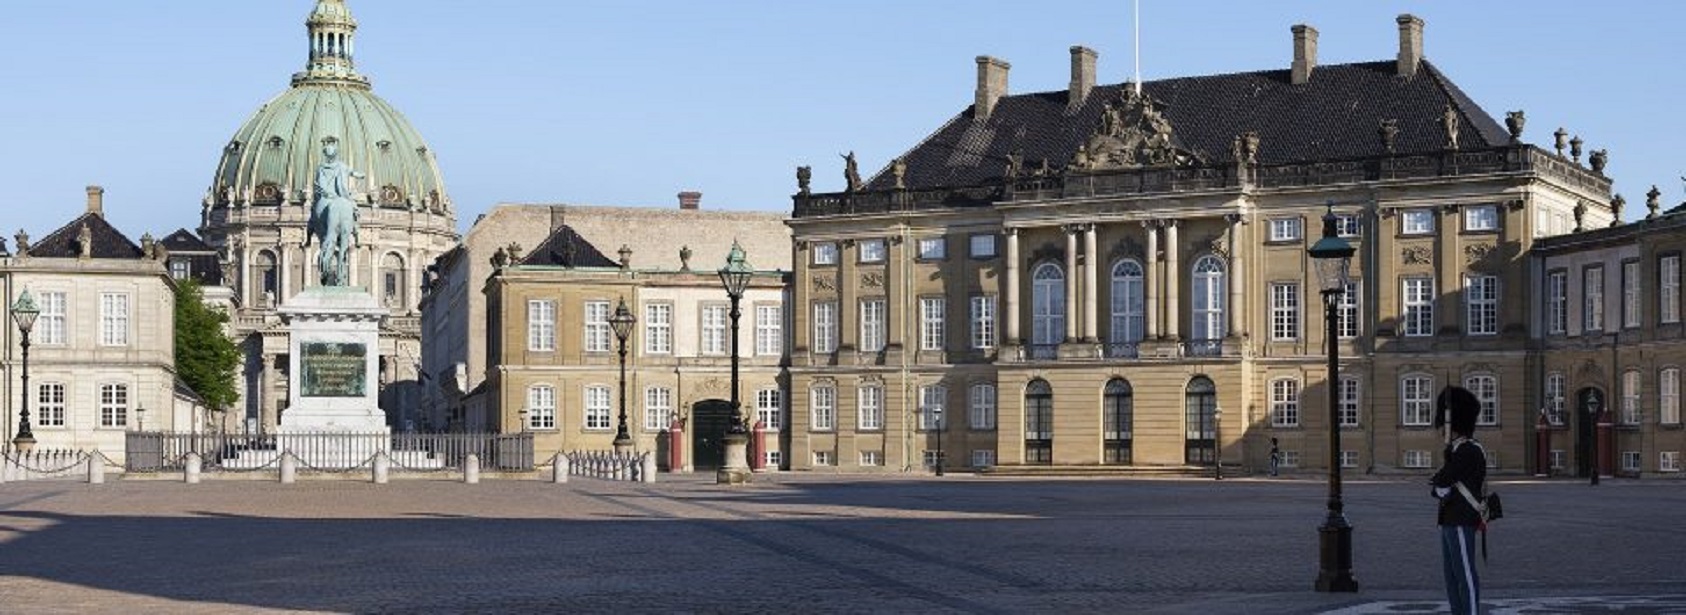 Amalienborg Palace Museum - Guided Tour and Lunch at Restaurant Amalie